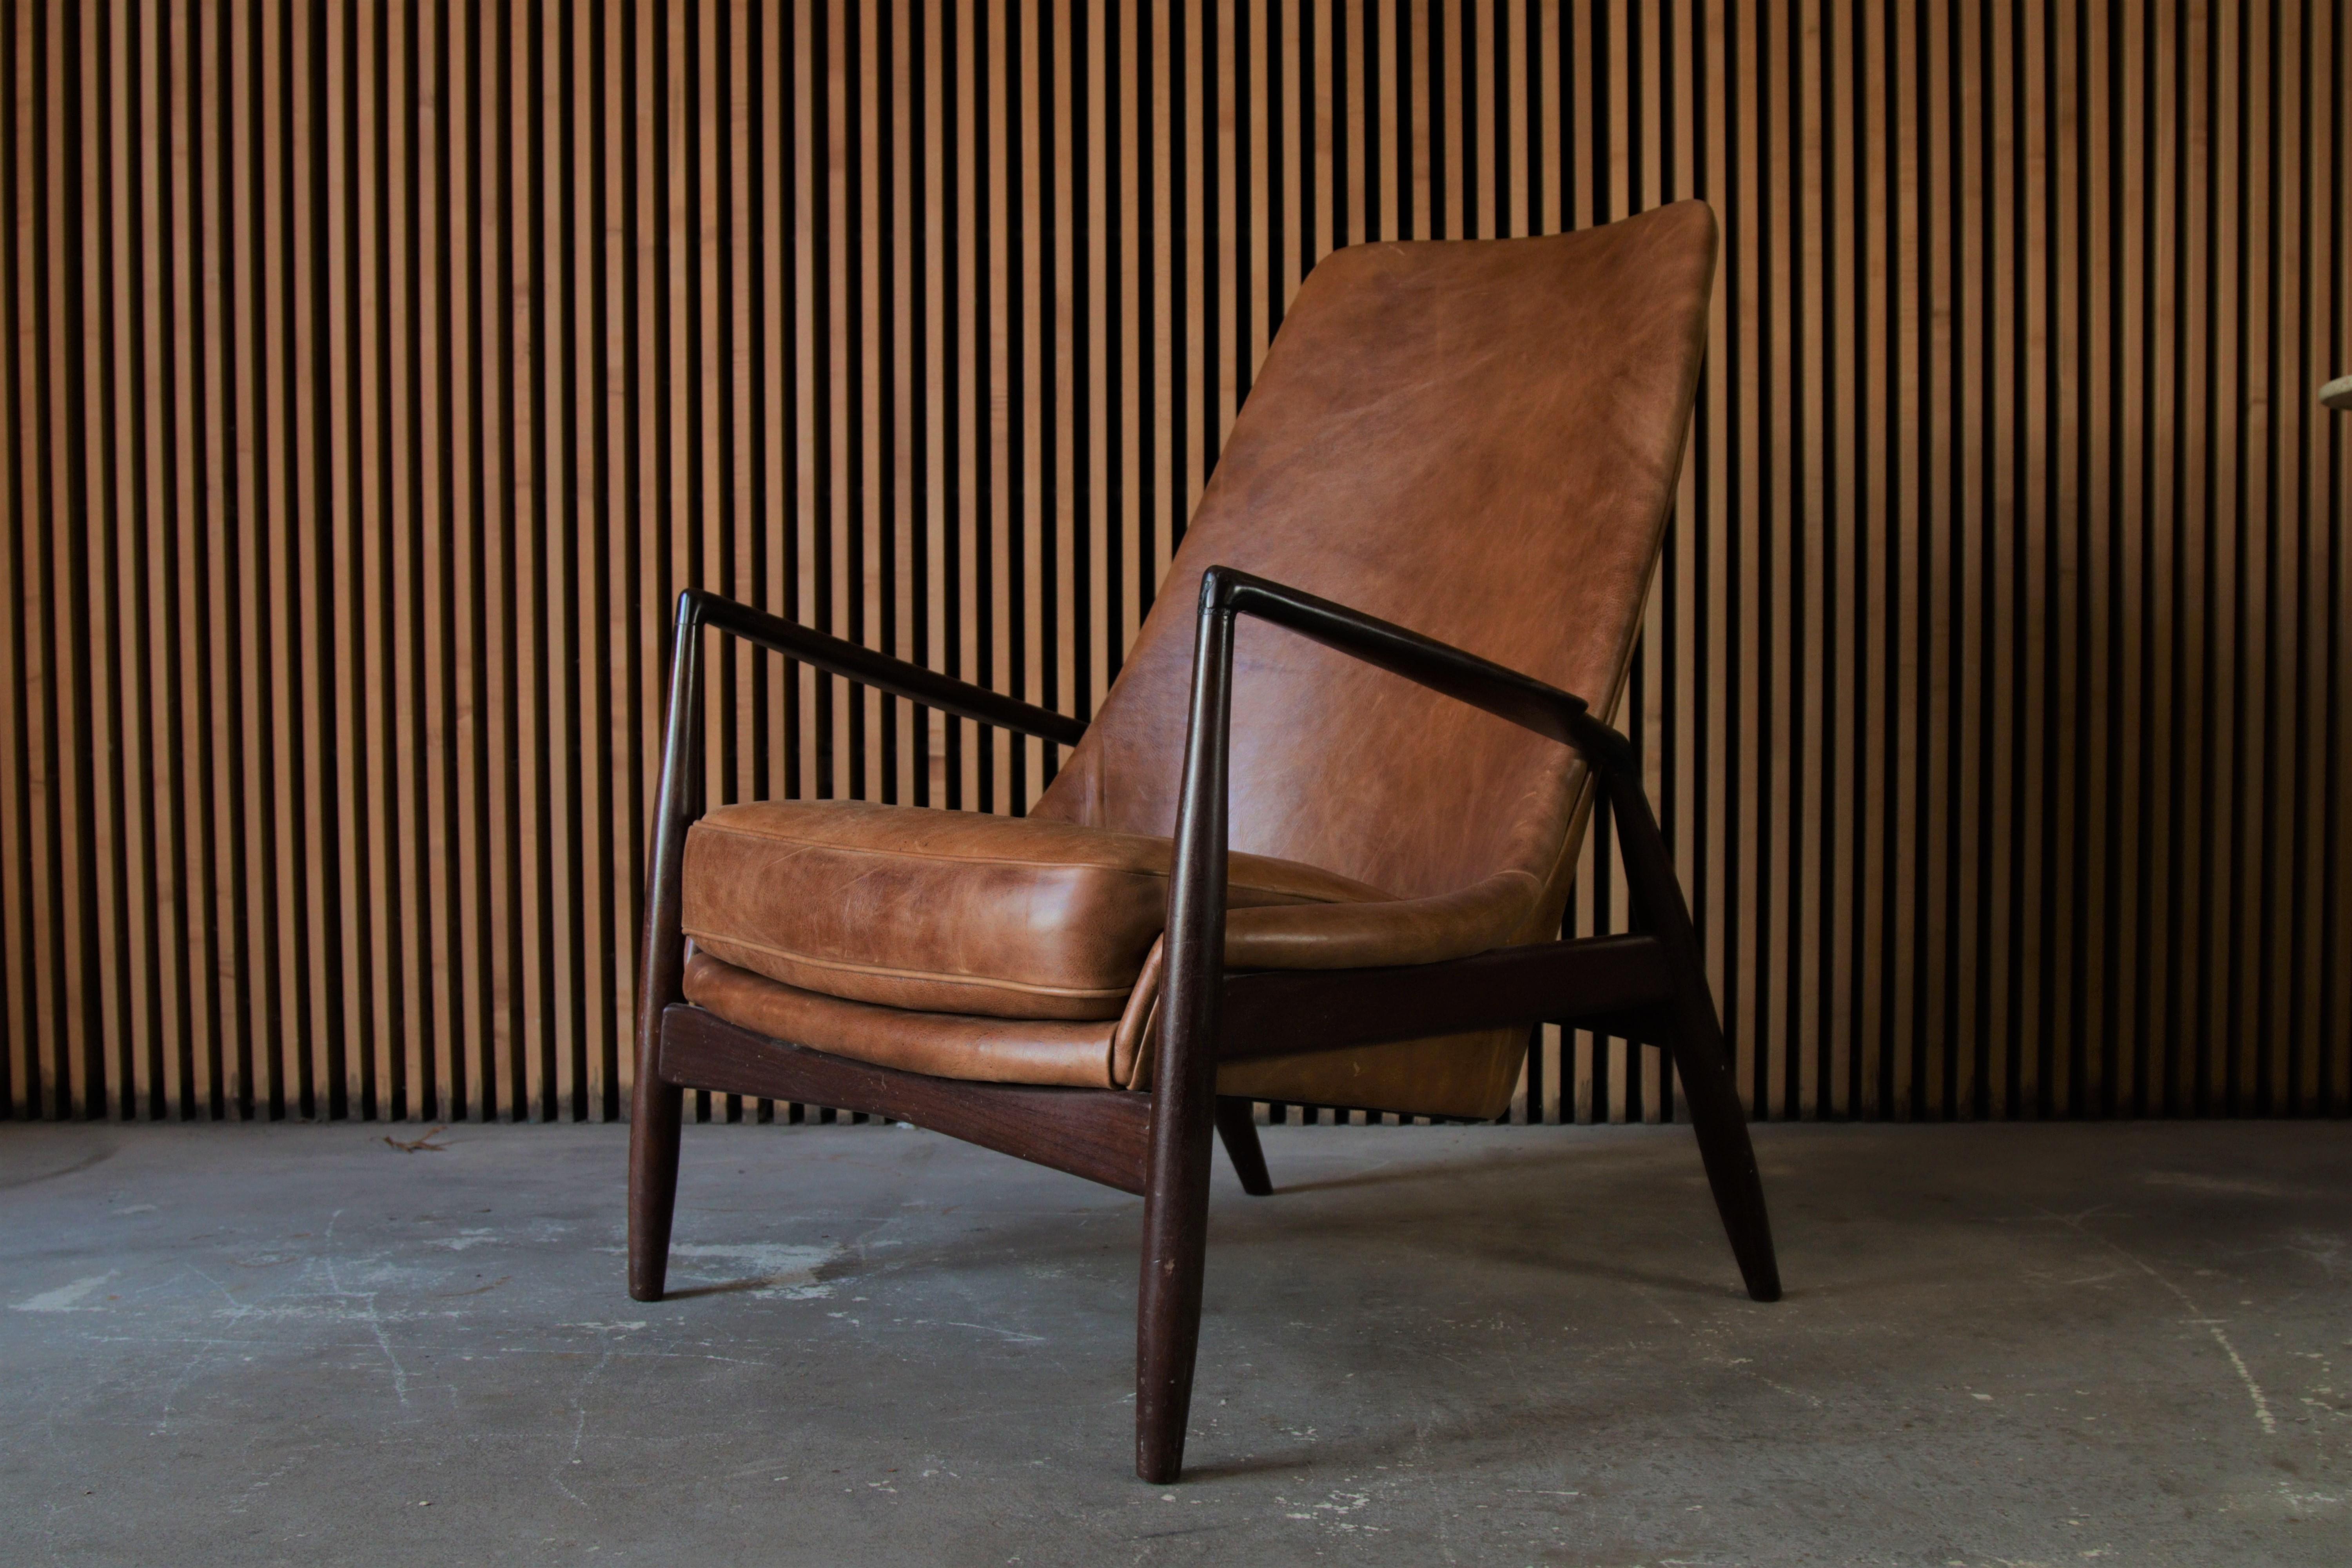 A vintage high back seal lounge chair designed by Ib Kofod-Larsen for Illums Bolighus. This example in Afromosia teak and distressed cognac leather. The Afromosia teak with a dark and rich patina.

Dimensions:
28